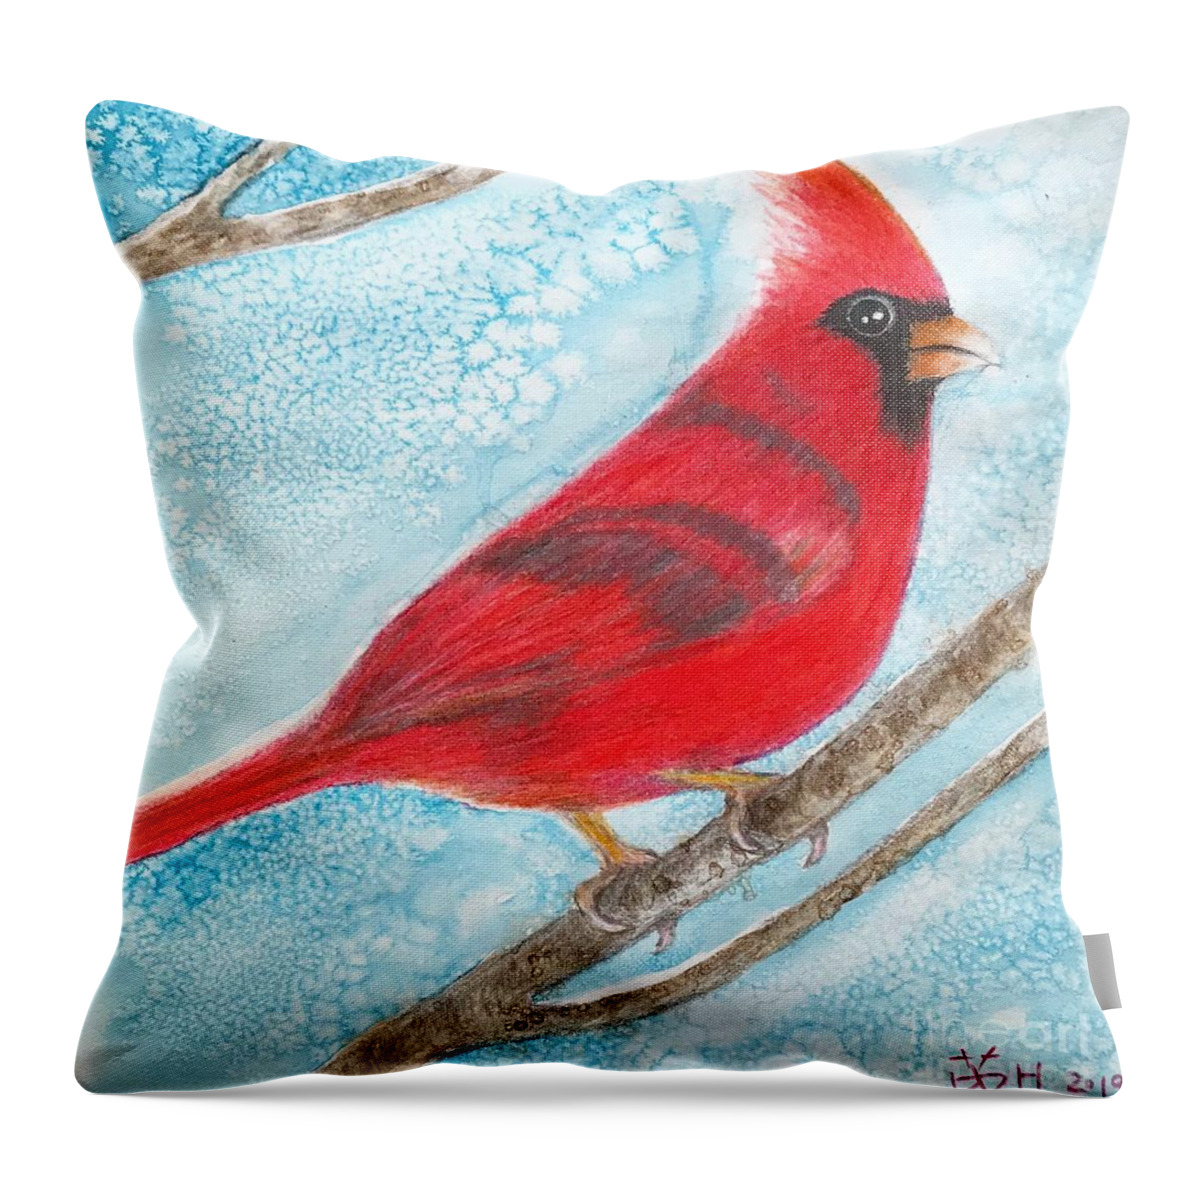 Red Bird Throw Pillow featuring the mixed media A red bird by Wonju Hulse